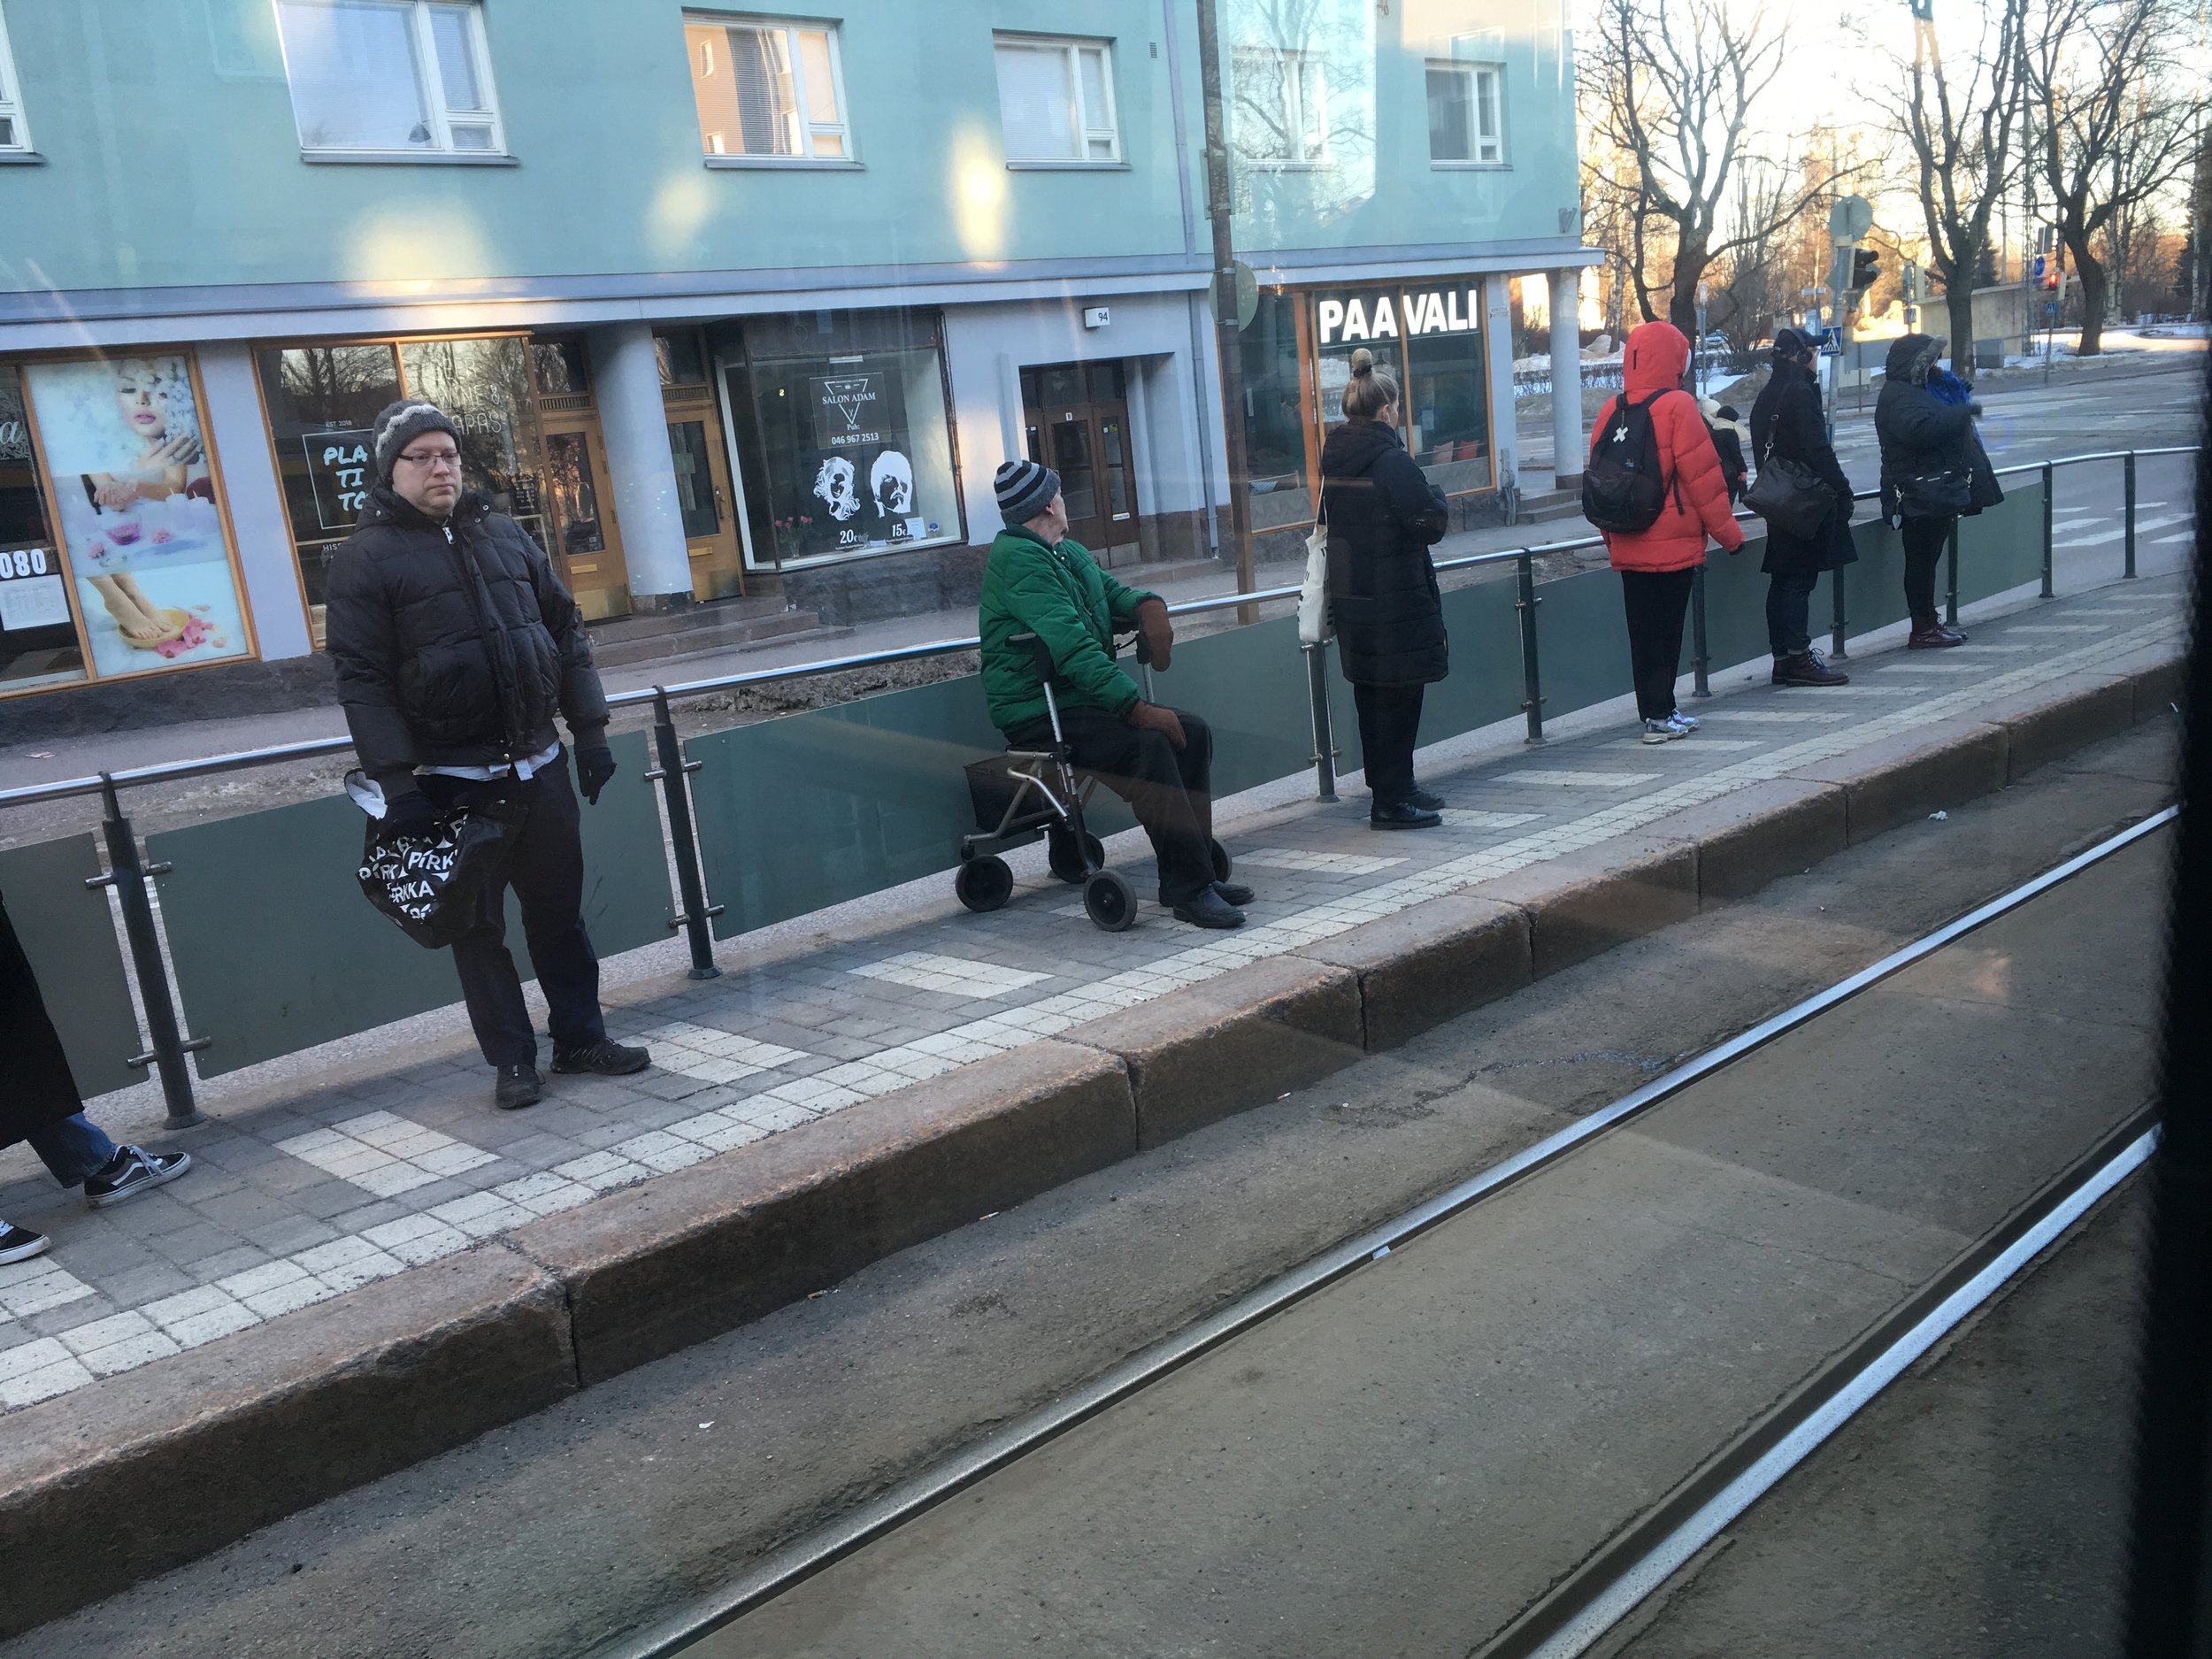 Watching people waiting for the tram in Helsinki is nothing like people waiting for the bus in Granada.